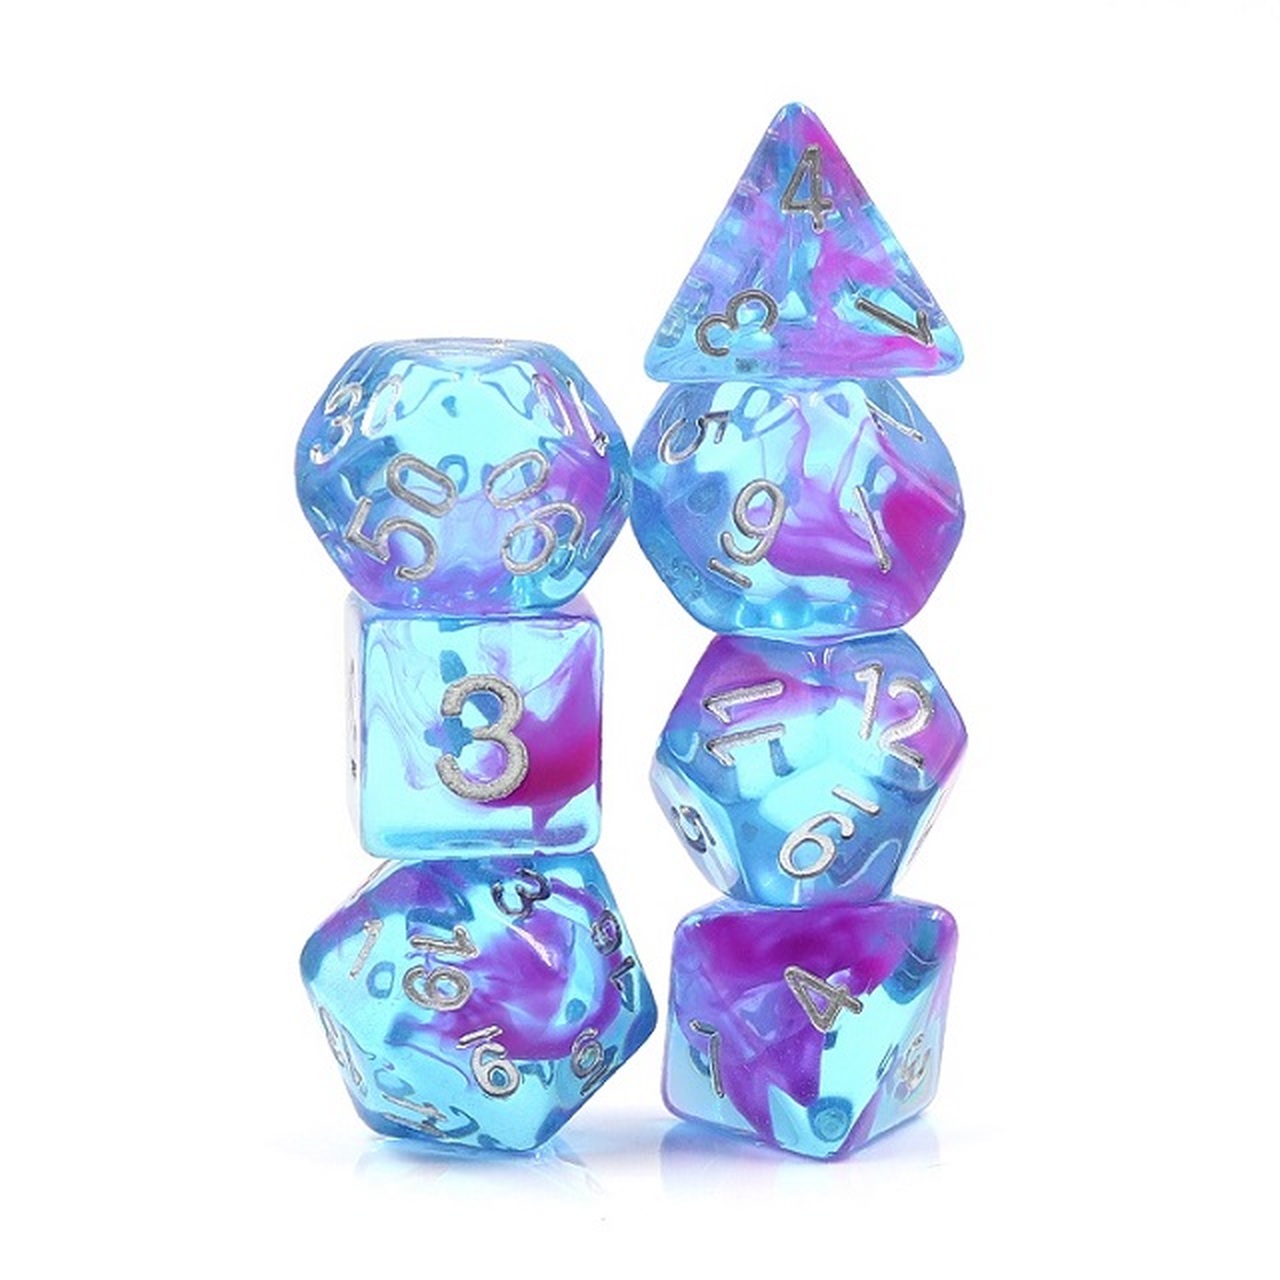 DND dice that are purple